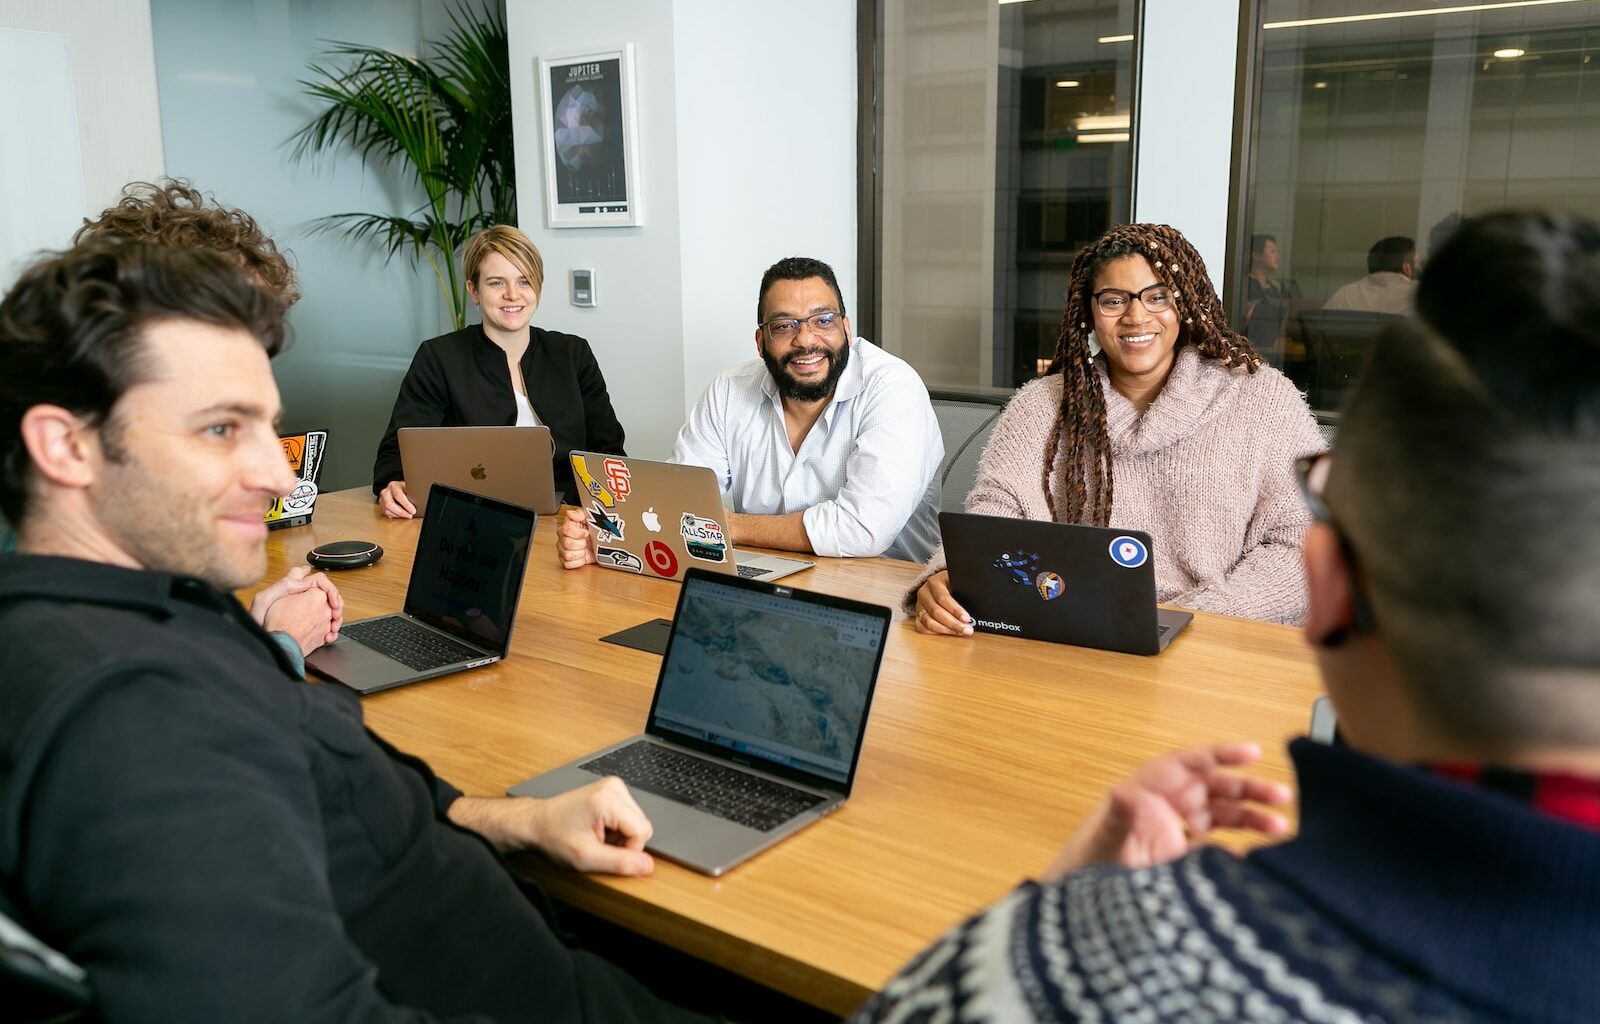 four people all on laptops, two men and two women, listen to person talking in a board meeting